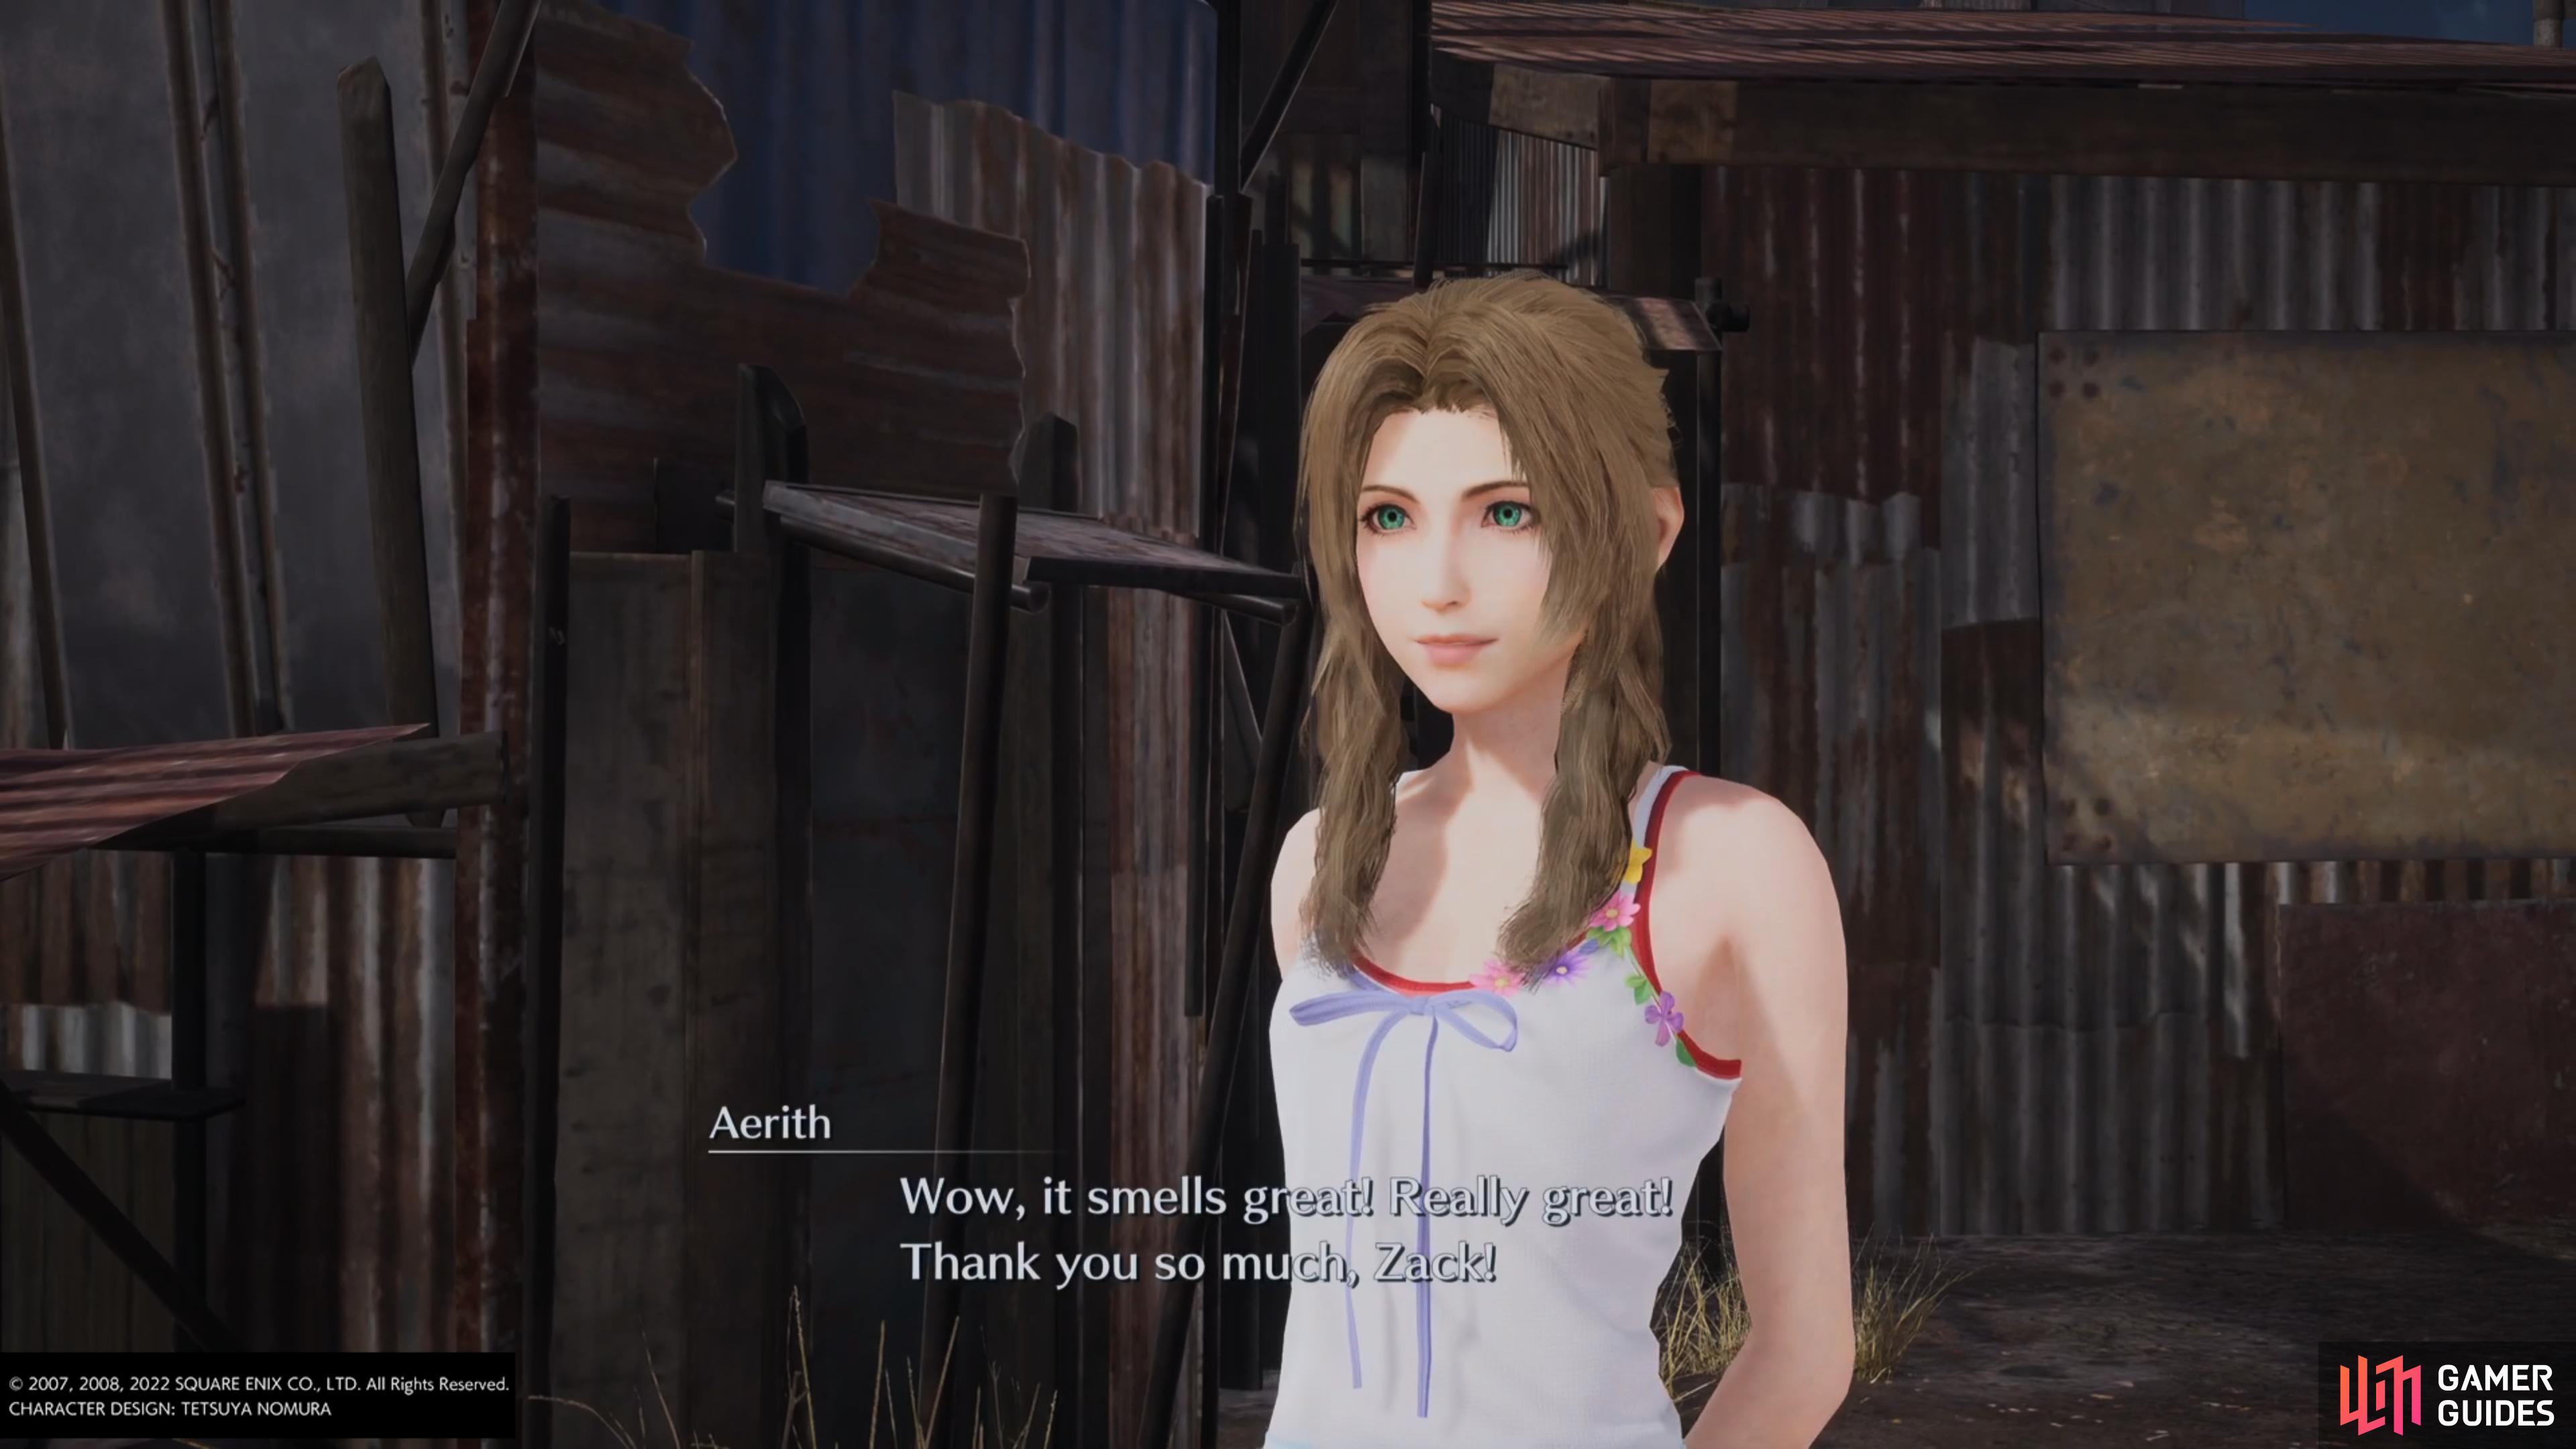 You will need to blend the perfect perfume to increase Aerith's affection in chapter 4.